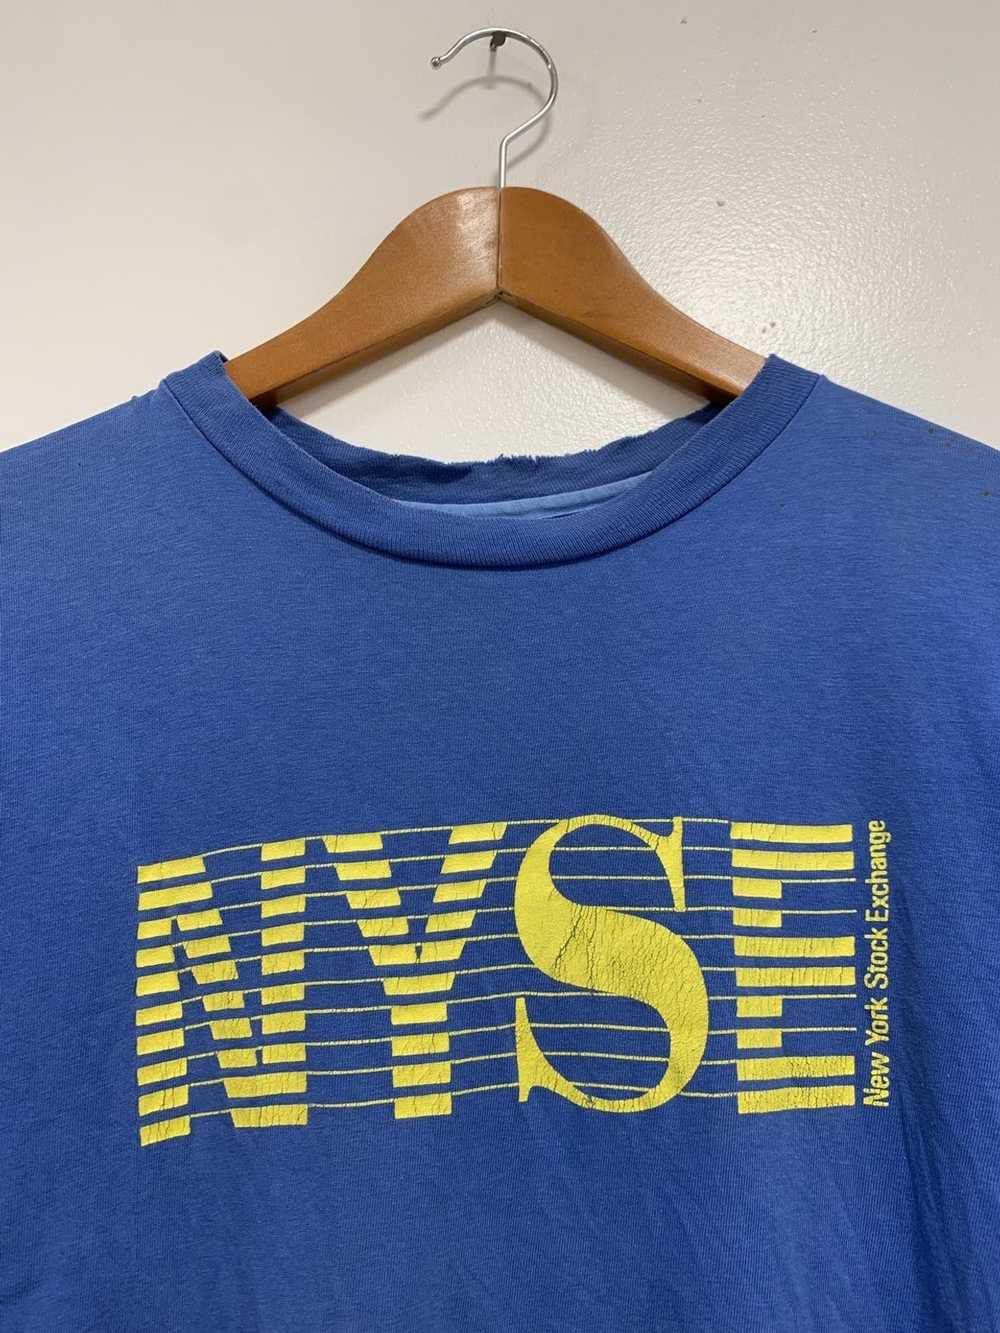 Made In Usa × New York × Vintage Vintage New York… - image 1